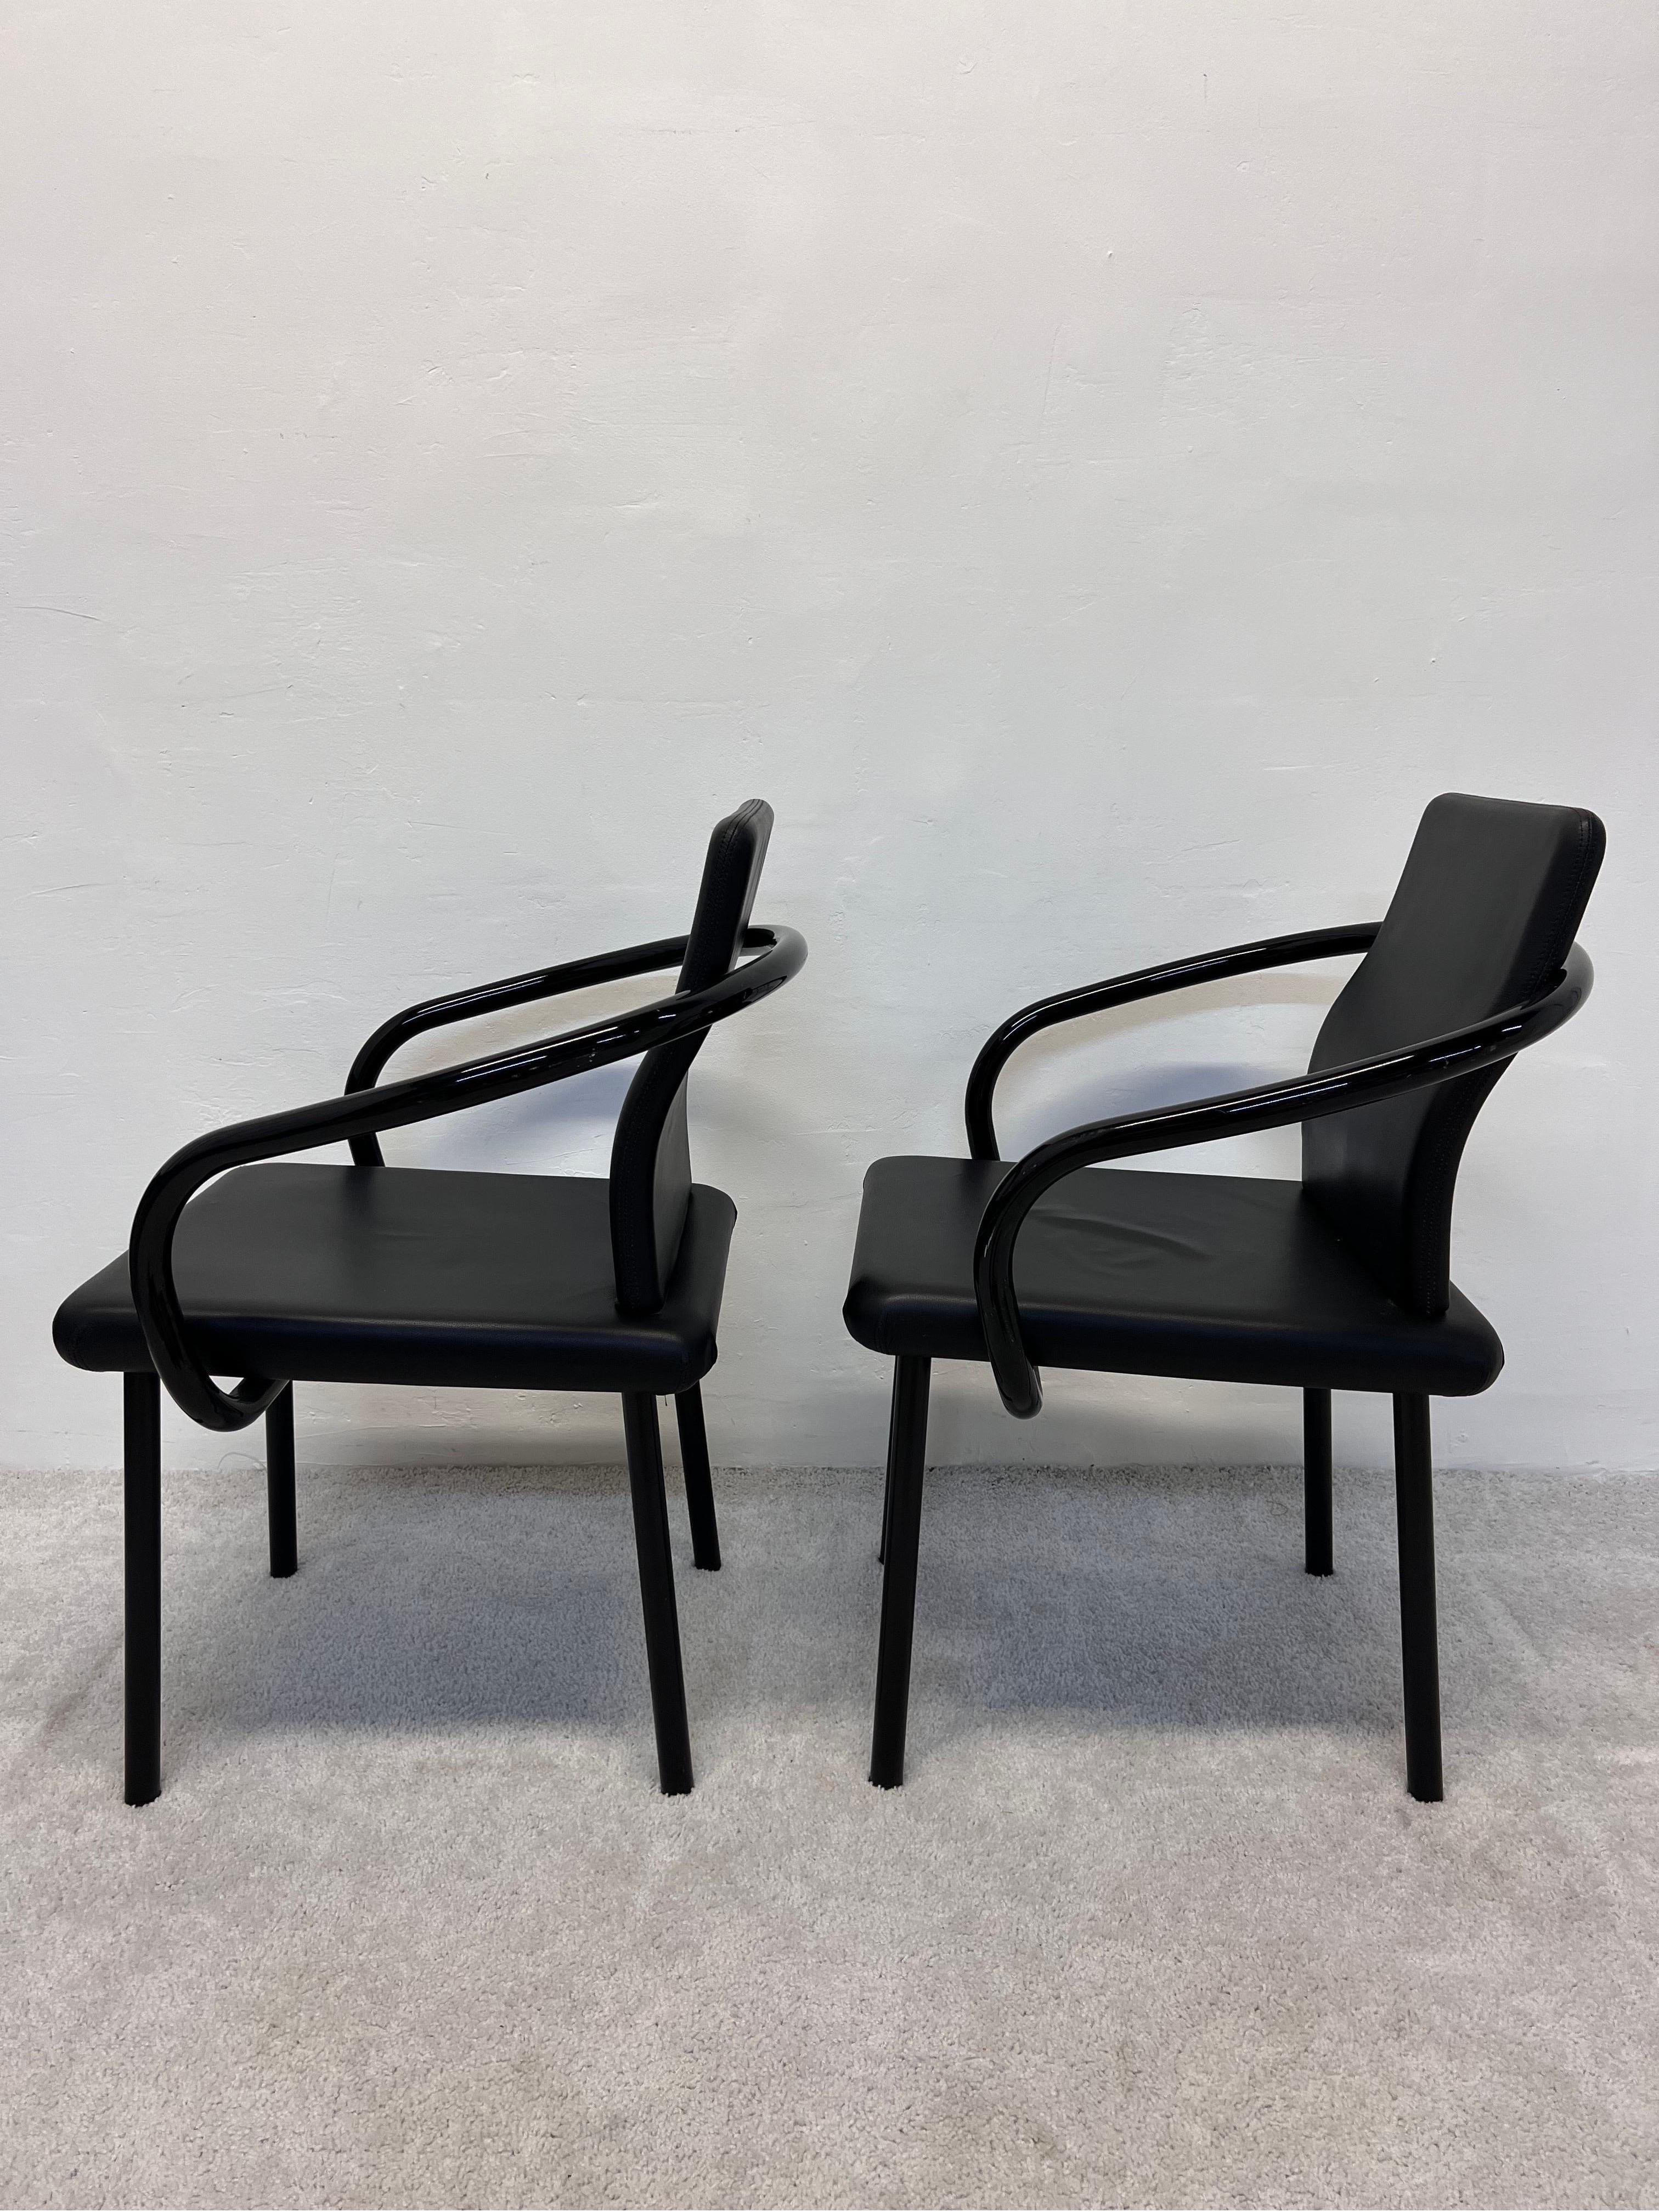 Ettore Sottsass “Mandarin” Black Eco Leather Dining Chairs for Knoll, a Pair In Good Condition For Sale In Miami, FL